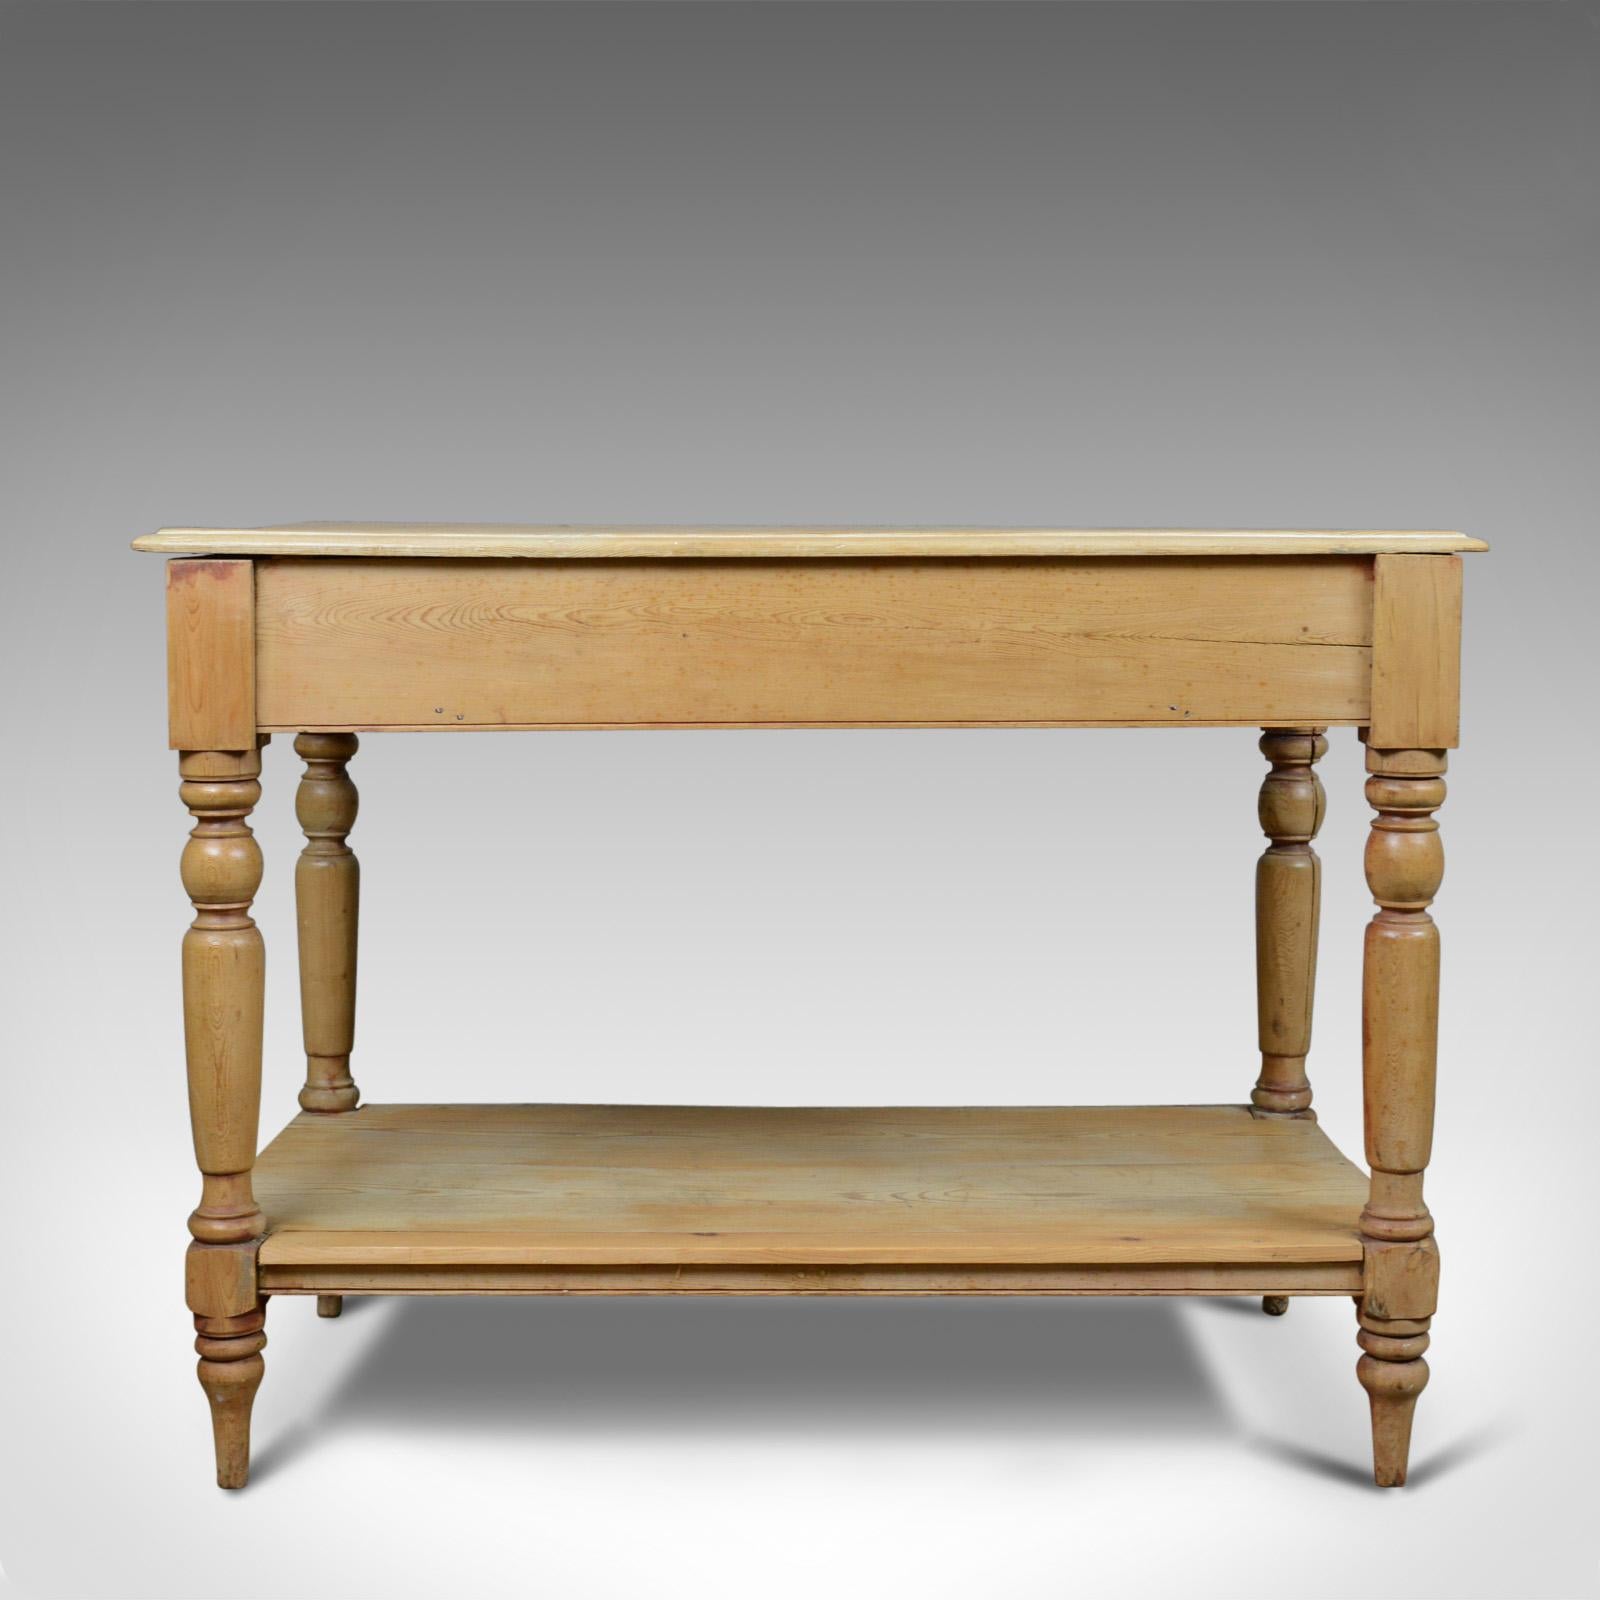 This is an antique pine console table. An English, Victorian kitchen work table dating to the late 19th century, circa 1880.

Mellow tones to the attractive antique pine
Grain interest and a desirable aged patina
Useful proportions and a good